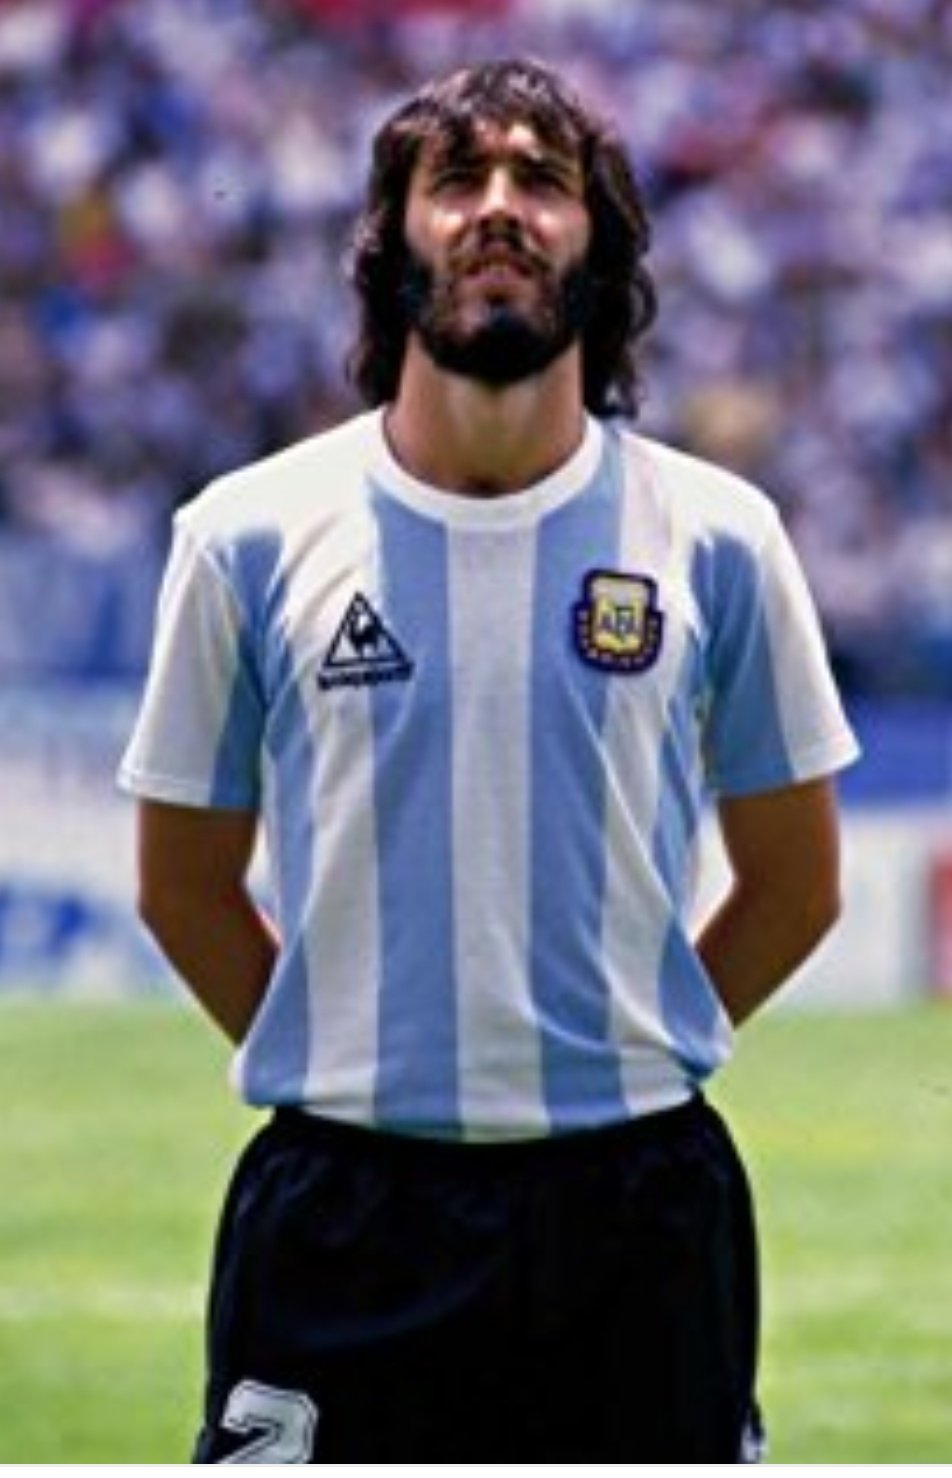 The Kit Bin On Twitter Sergio Batista And Gennaro Gattuso Are The Only 2 Players To Have Won The World Cup While Sporting A Full Beard So Here S A Look At Them